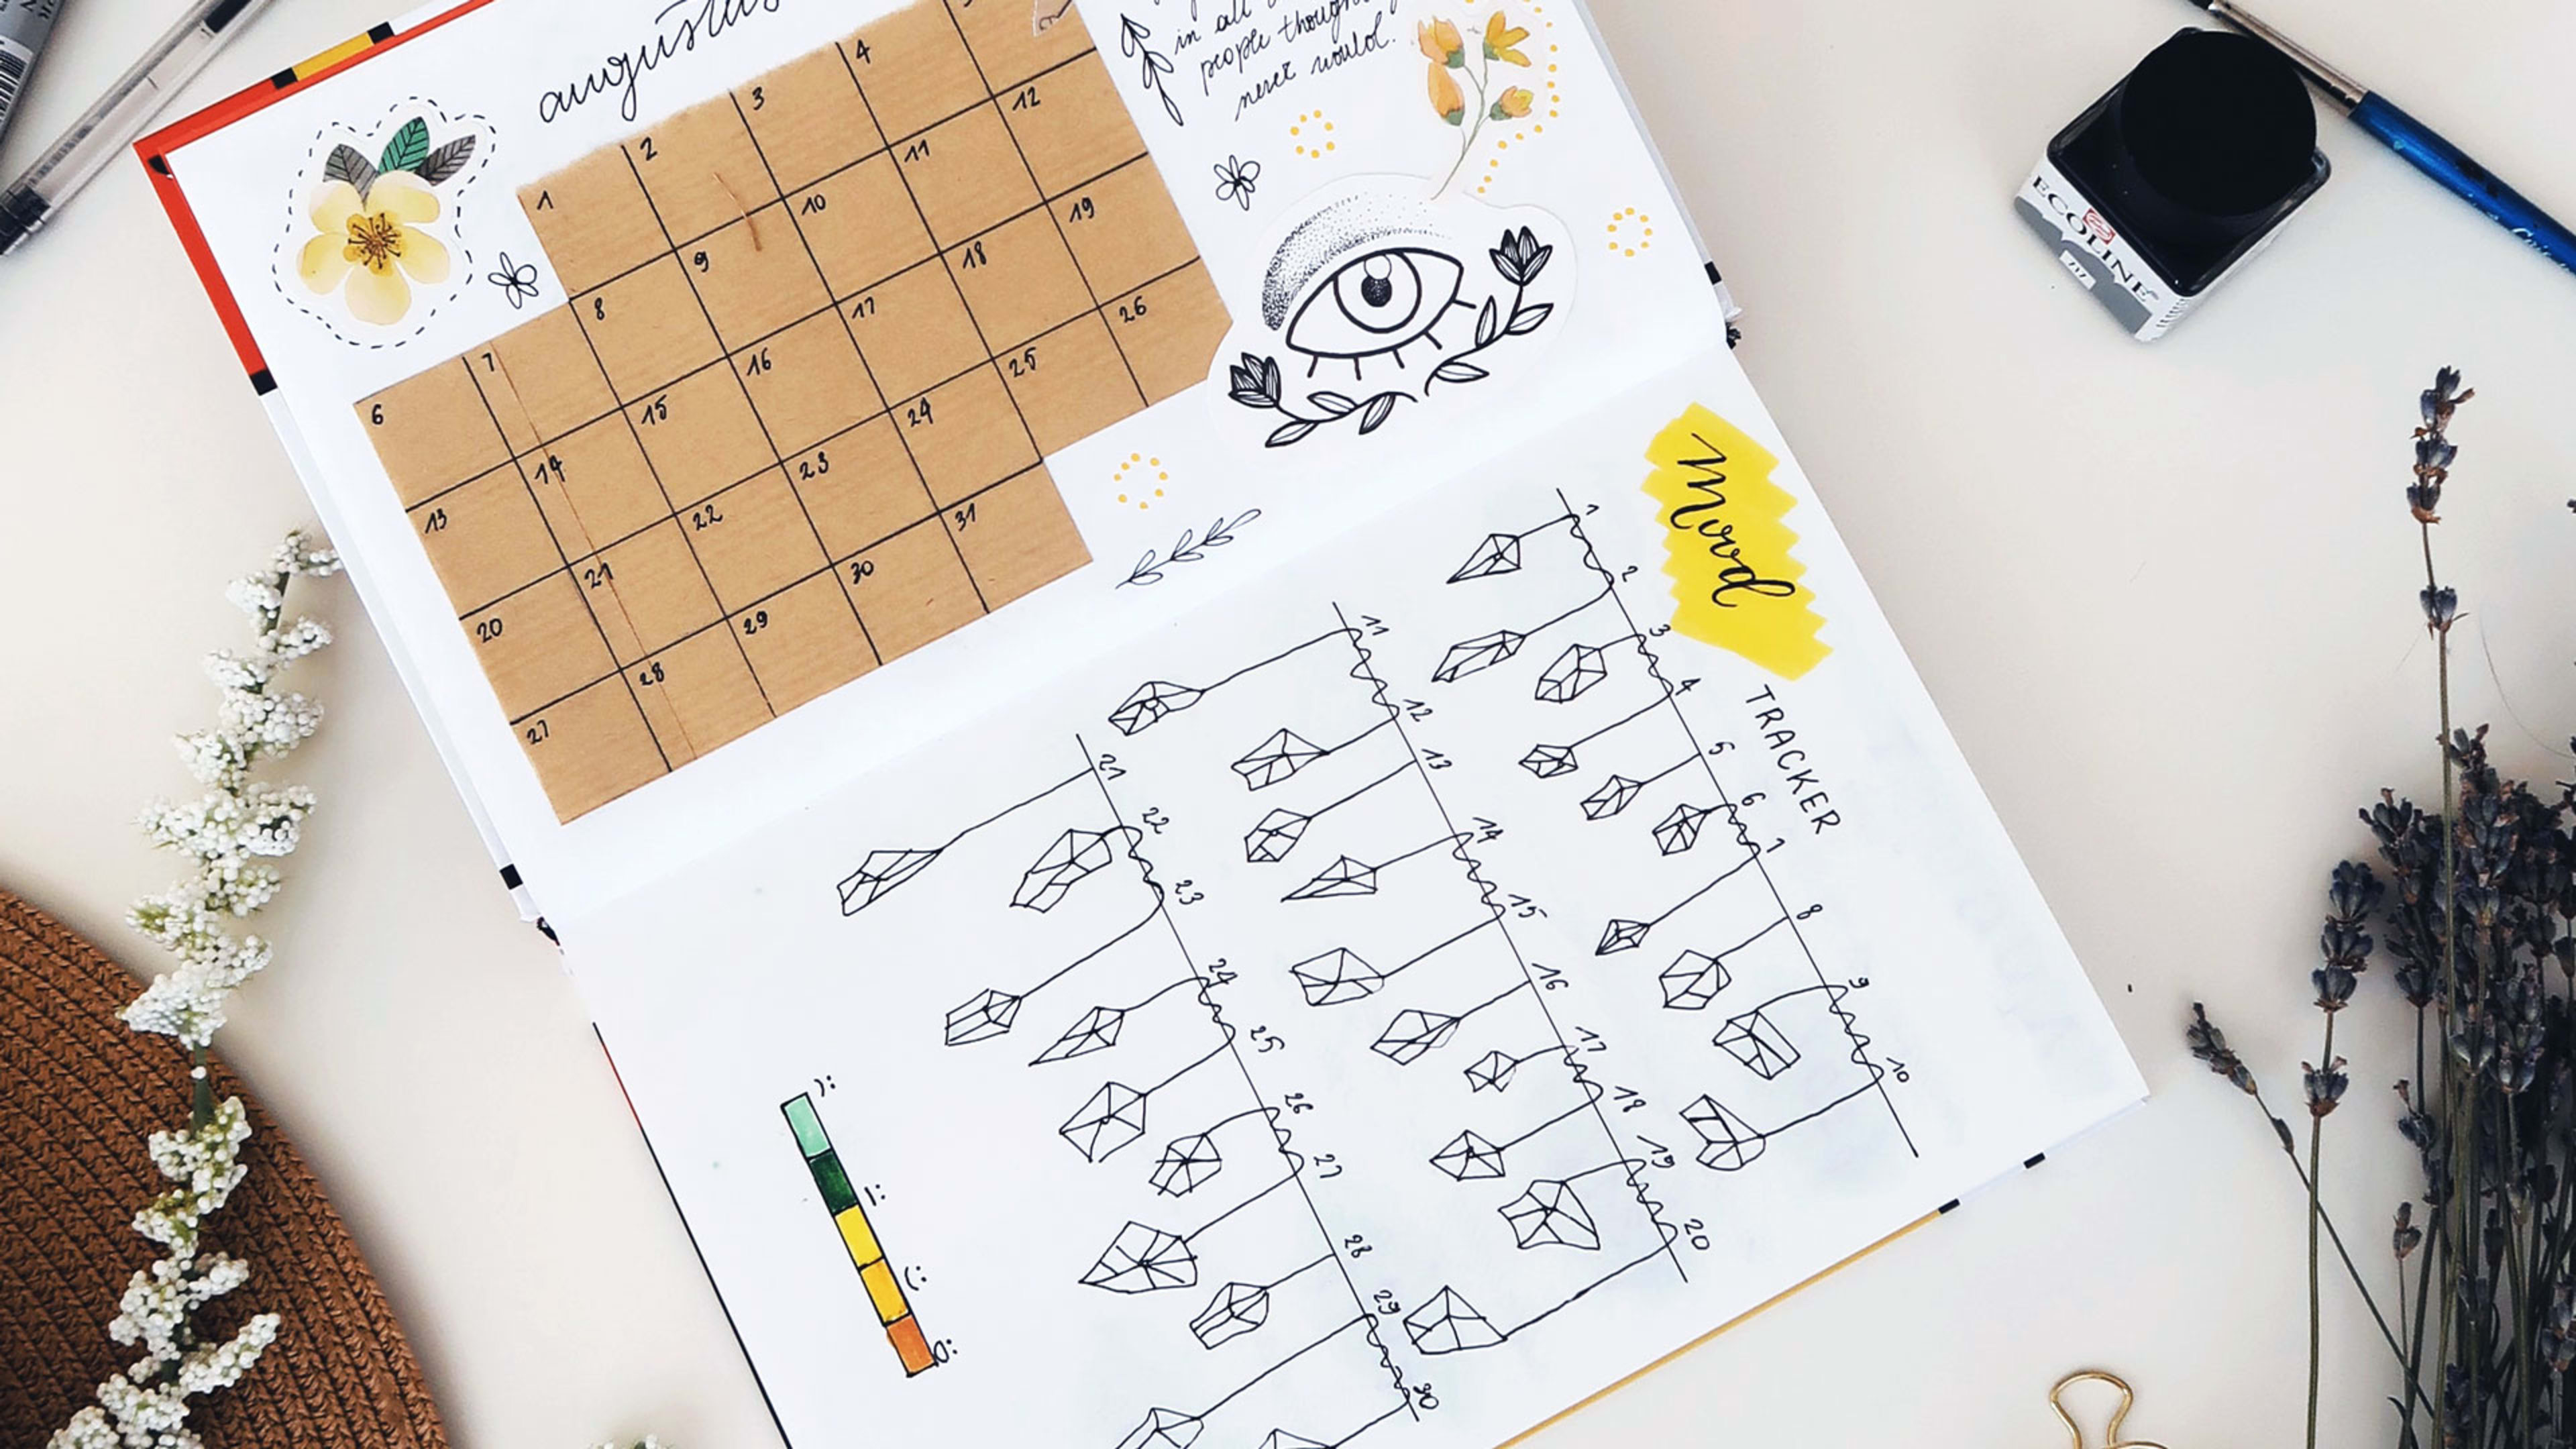 How to use a bullet journal to kick-start your mindfulness practice